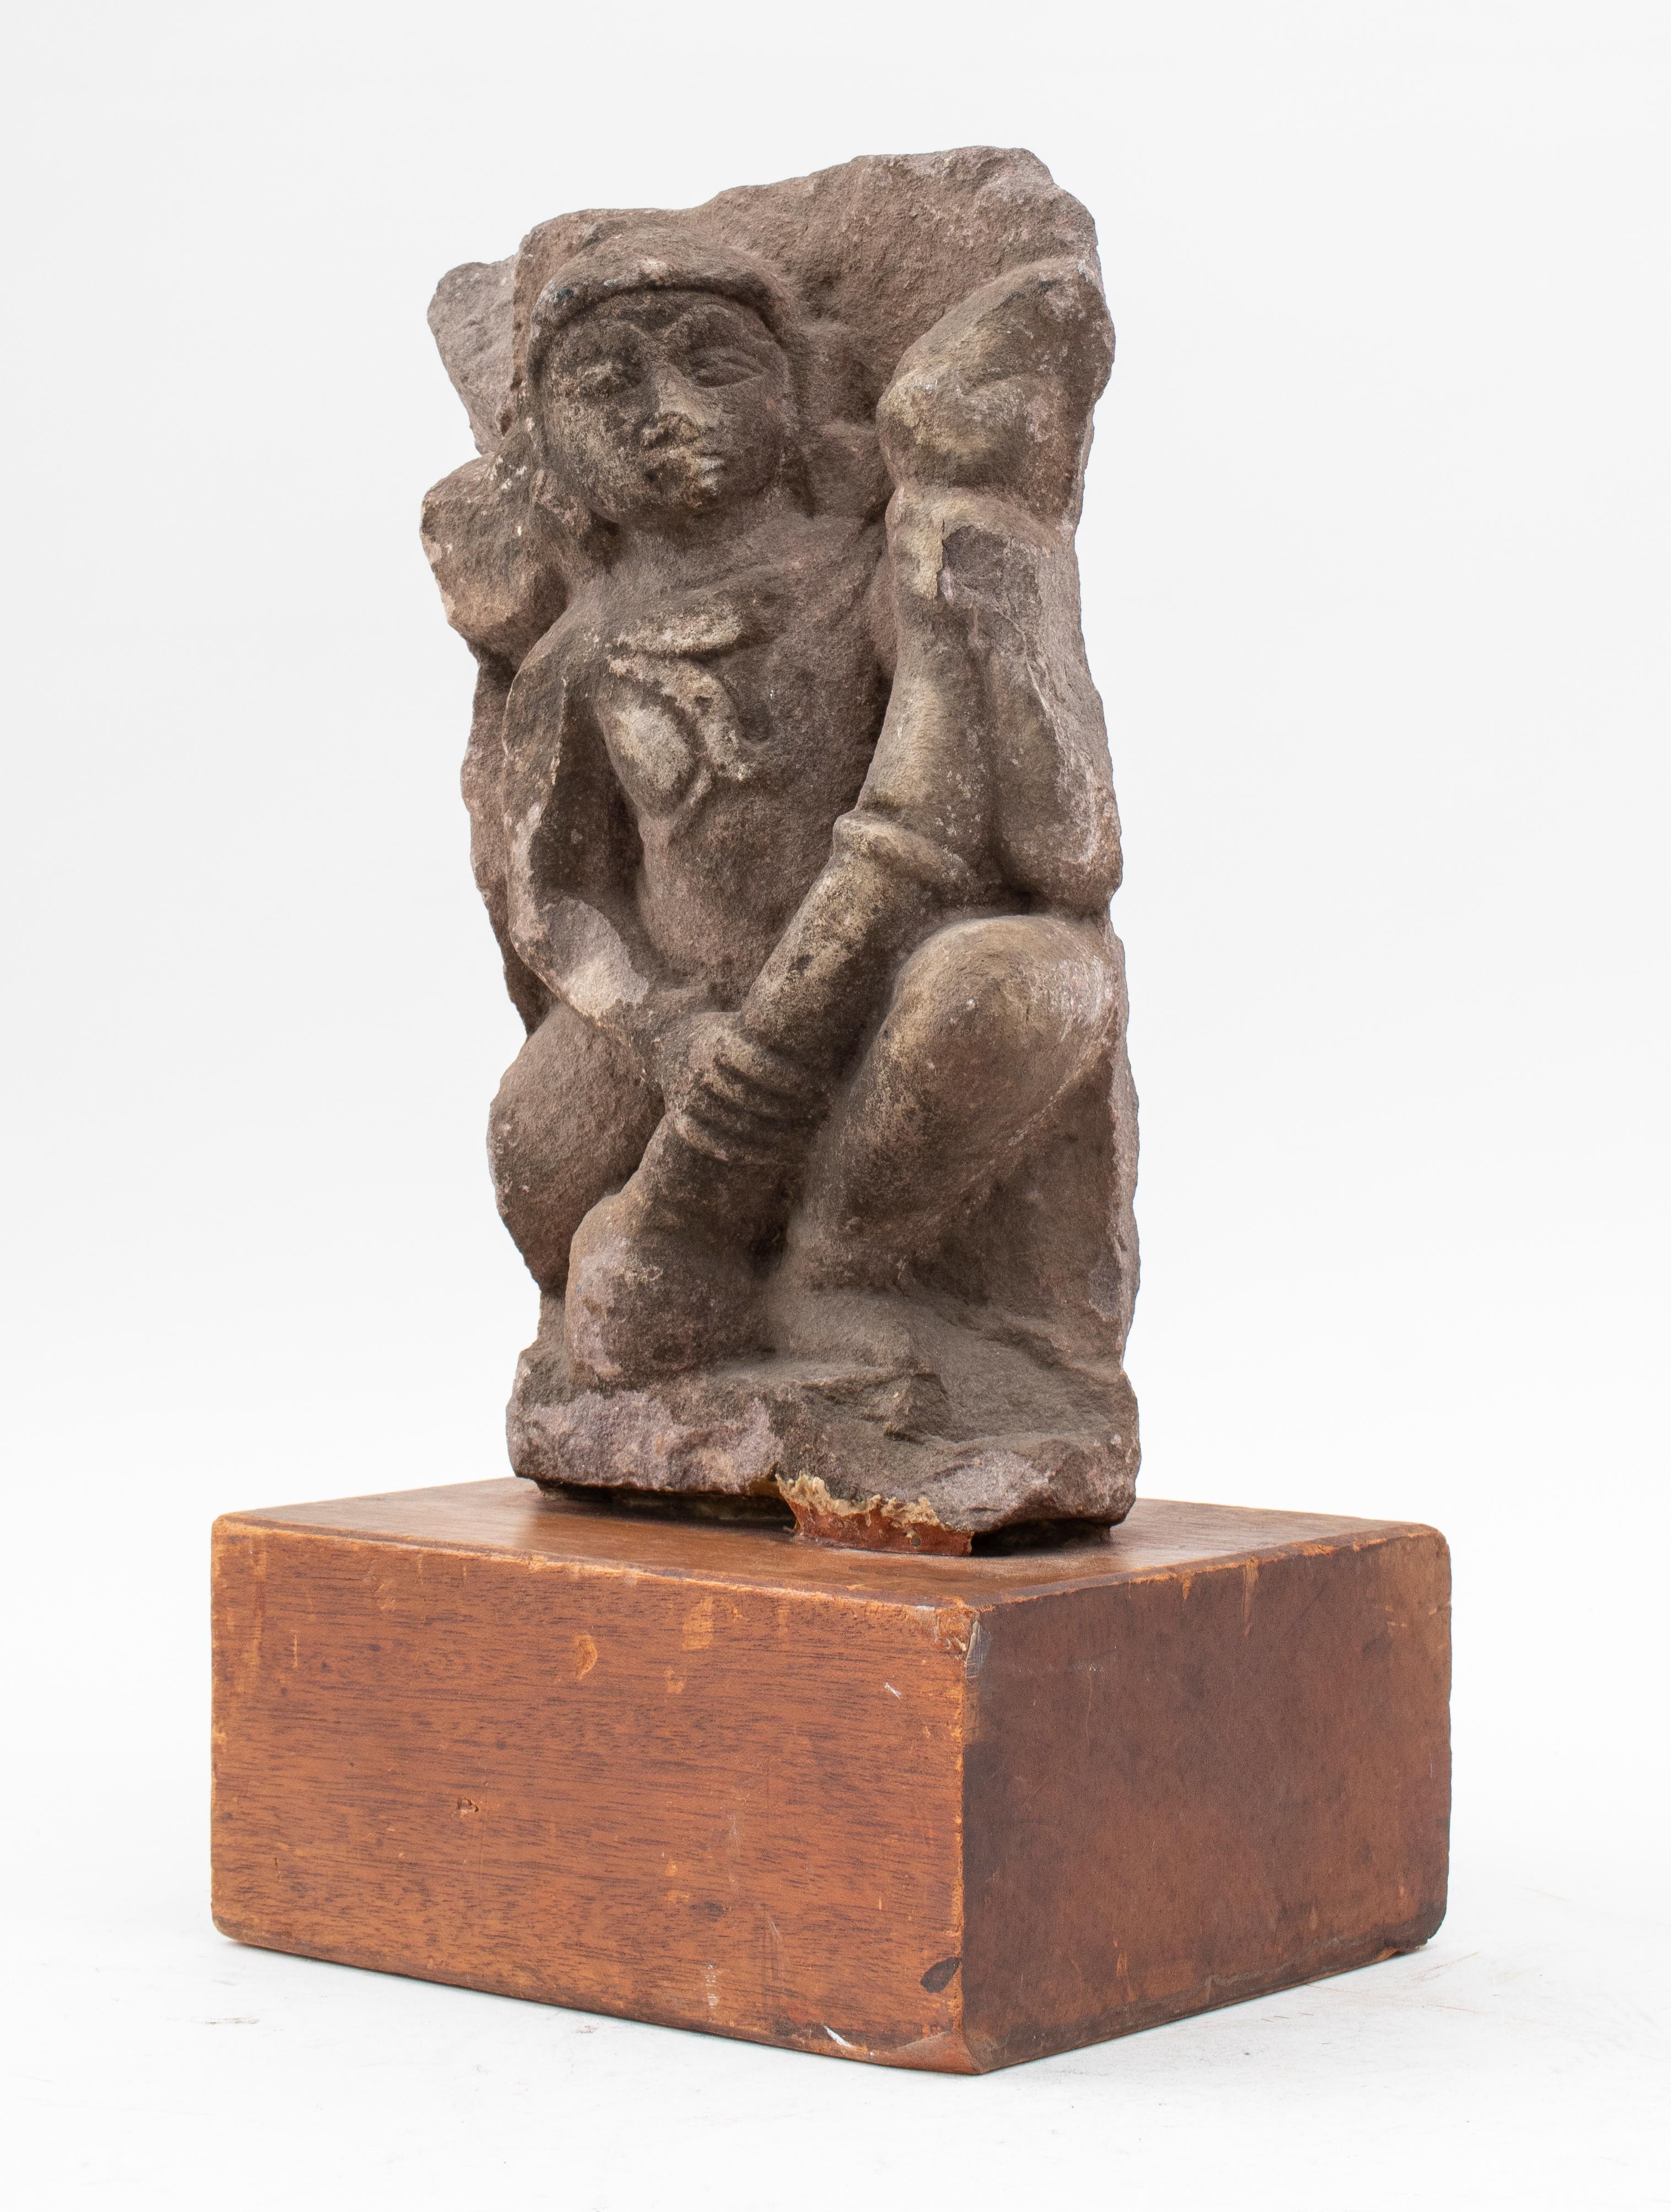 Antique Indian stone carving depicting Shiva, was likely once part of a large ancient altar idol sculpture with multiple deities, now mounted upon a hardwood stand. 
Measures: 18.5